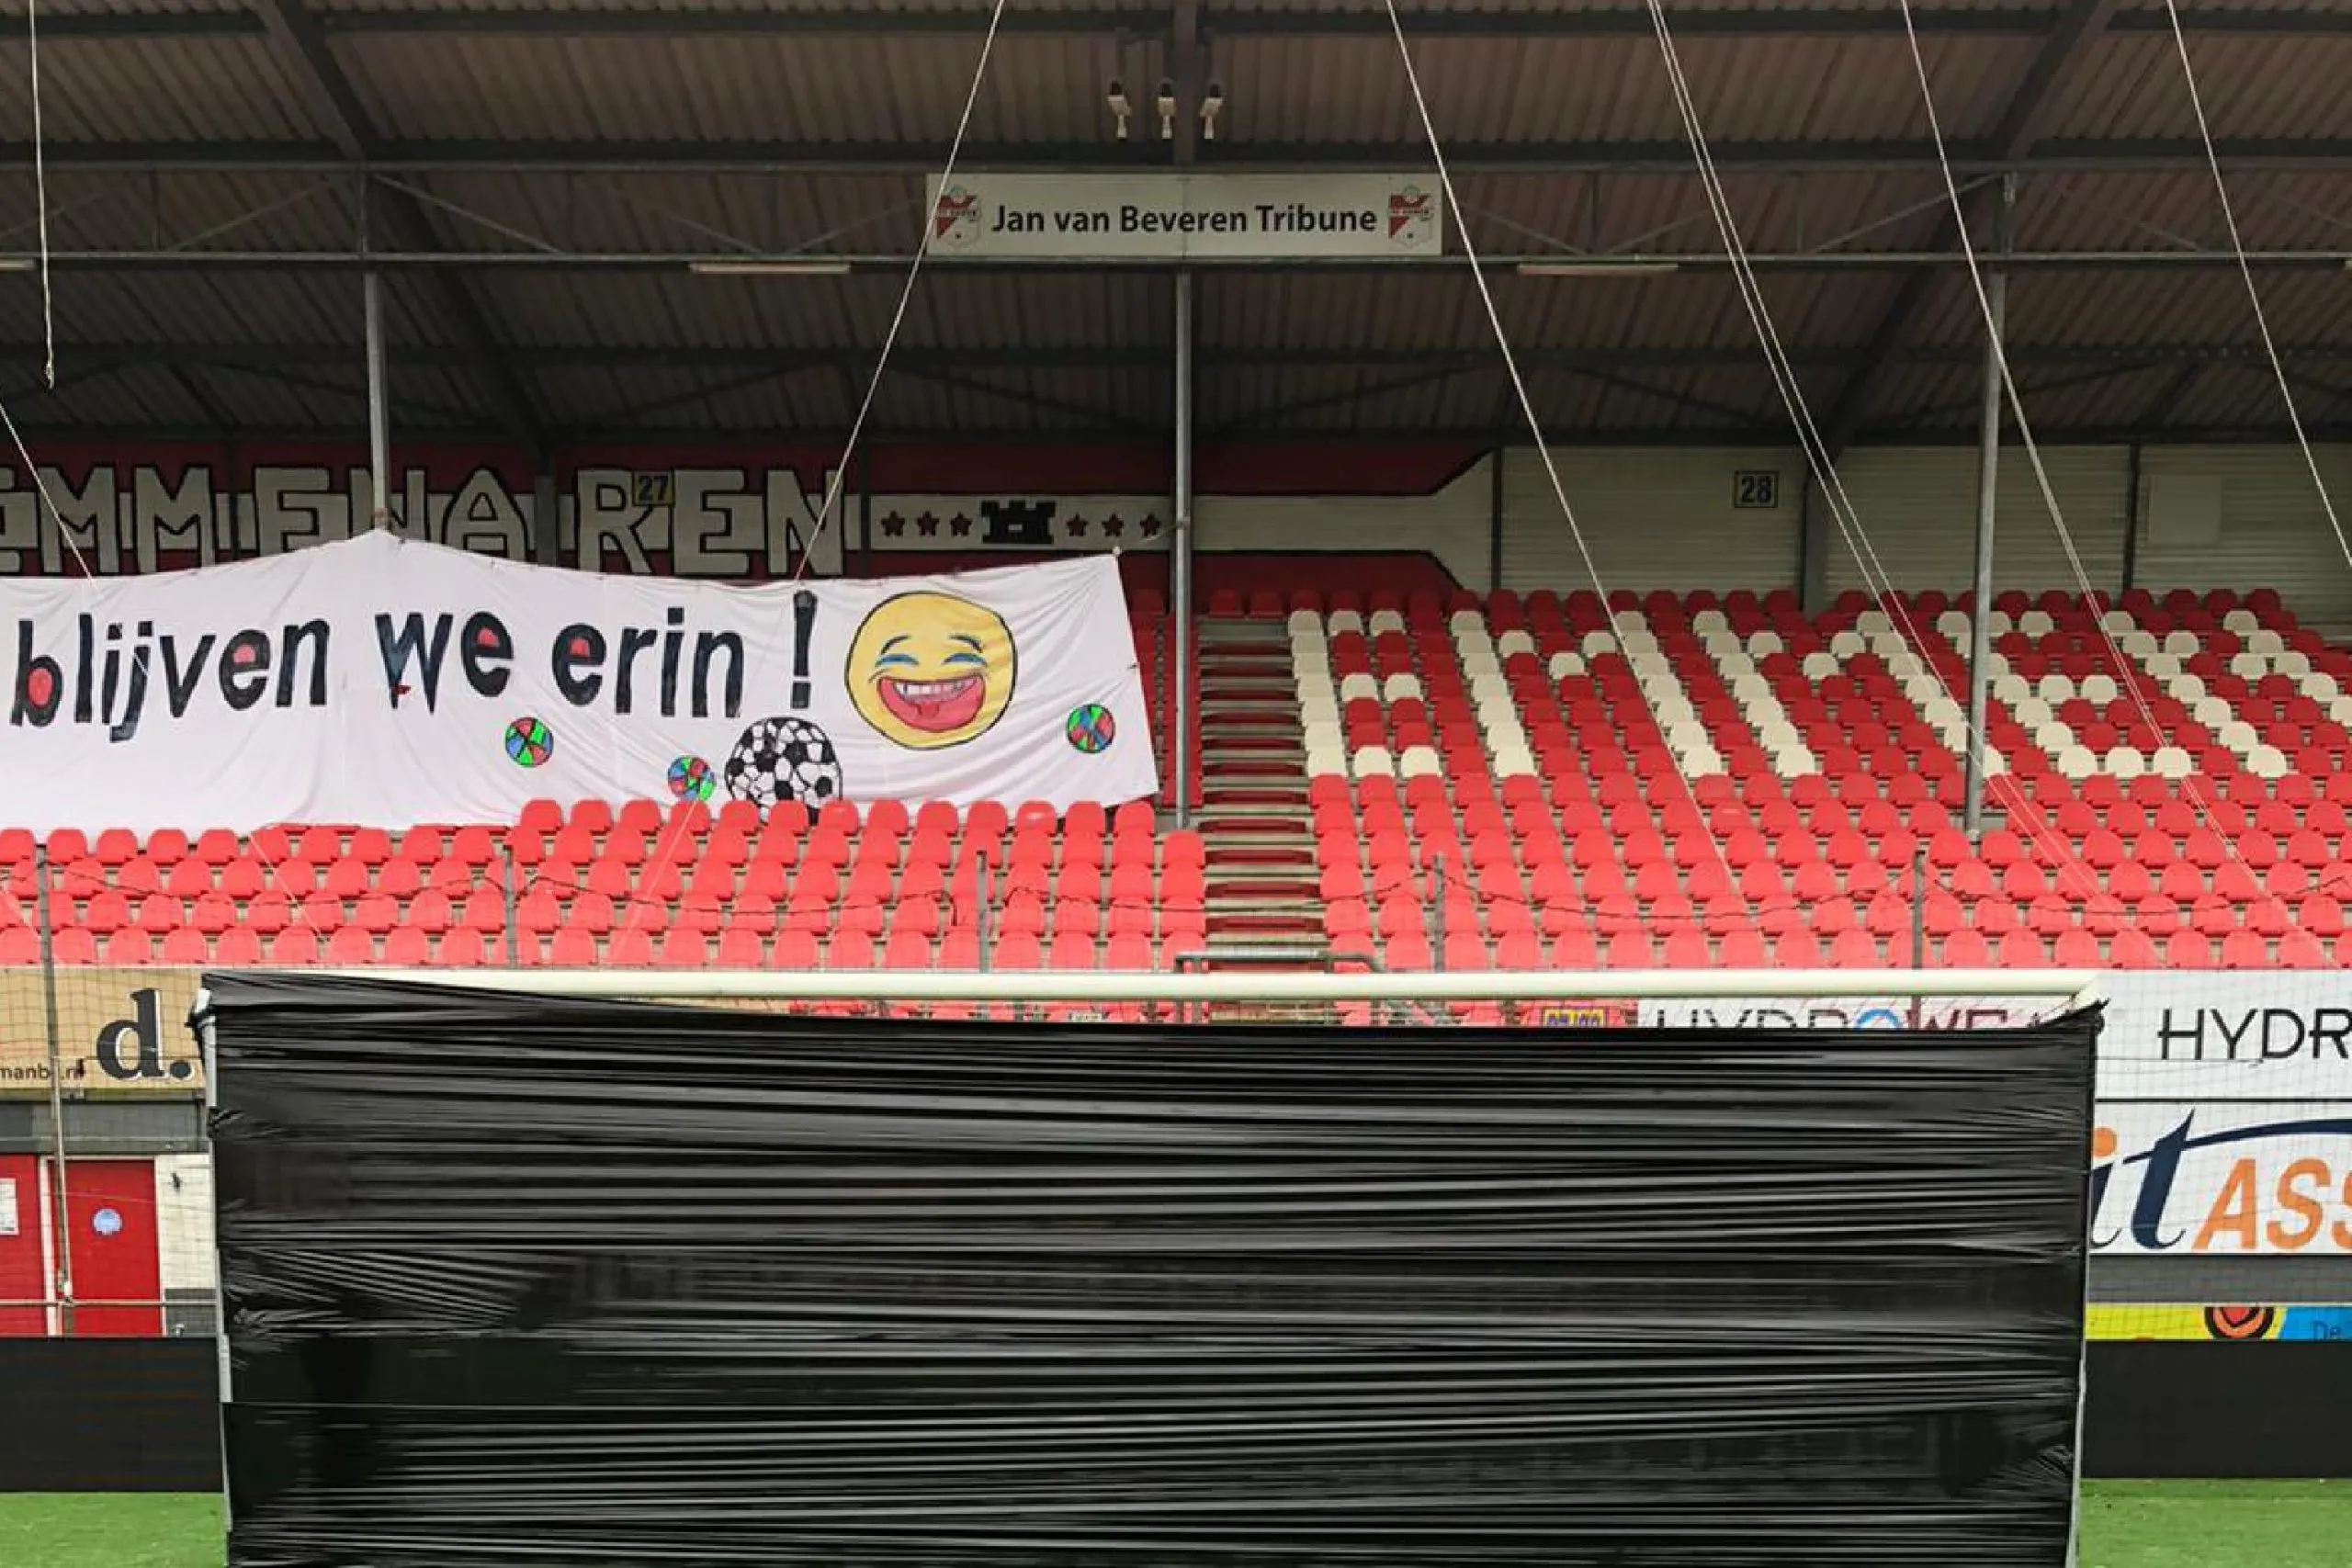 Fans of bottom placed FC Emmen seal their goal shut with tape